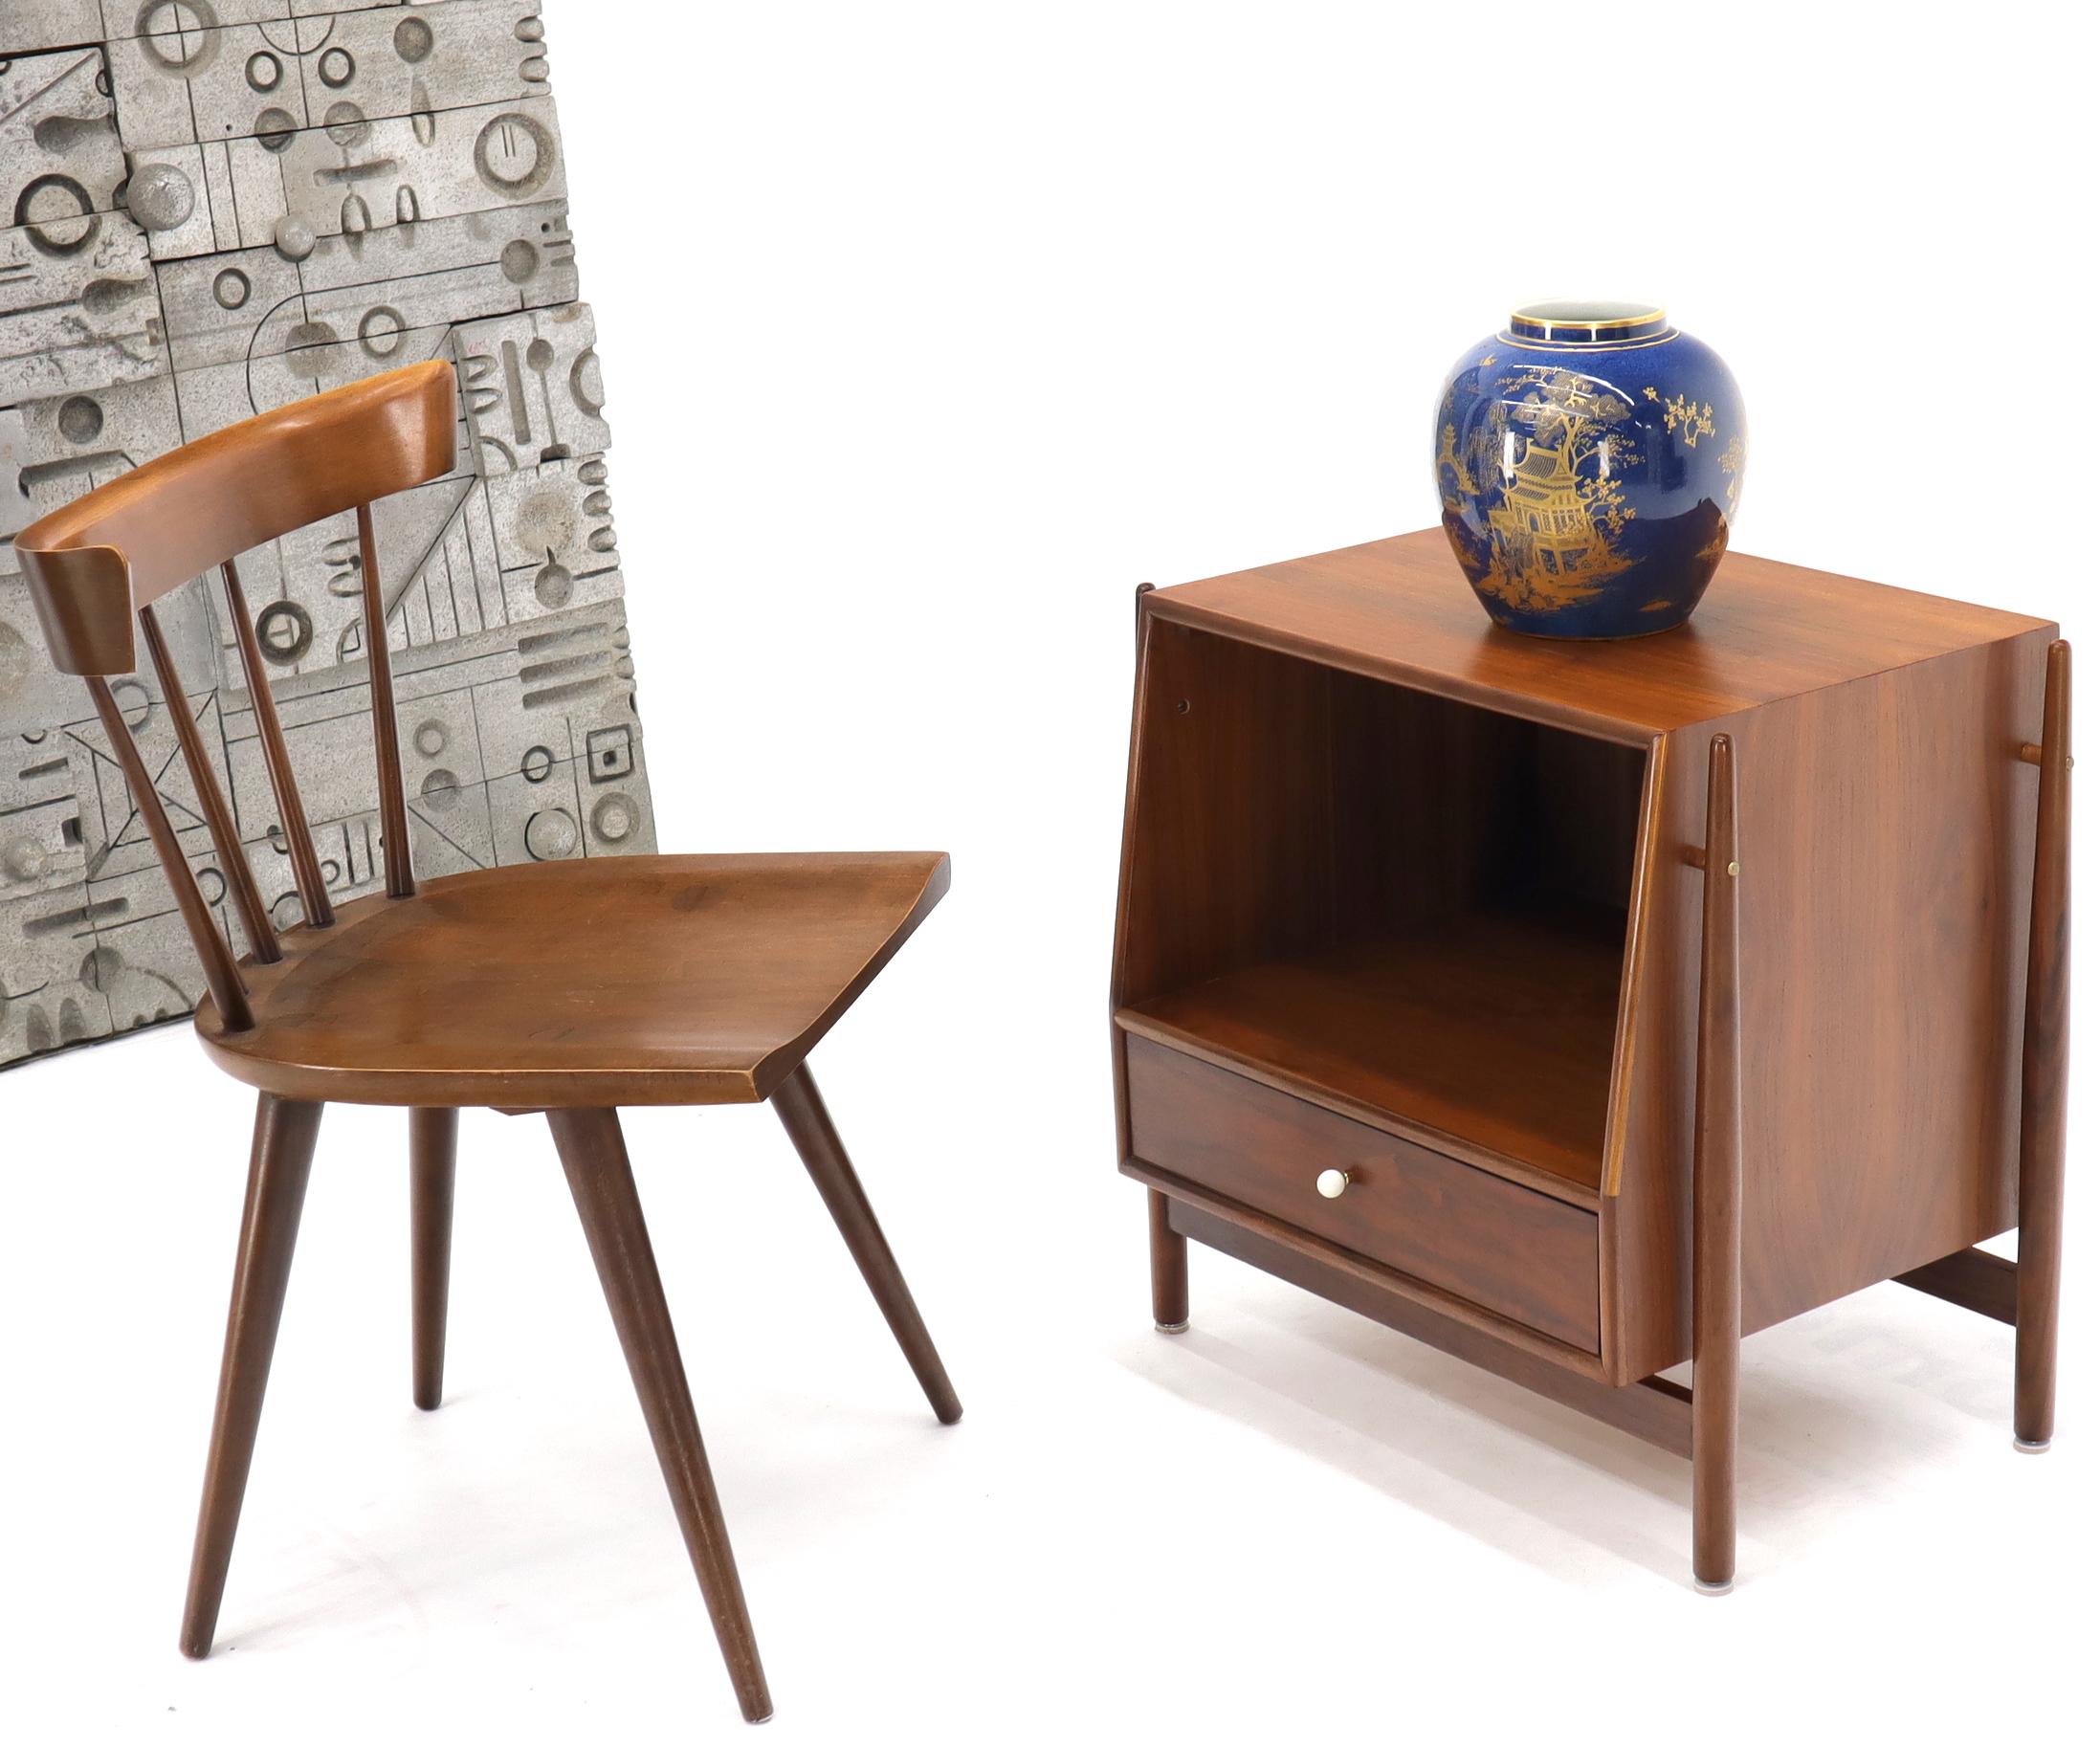 Pair of sculptured bases walnut Mid-Century Modern end side tables nightstands. Excellent original condition with vivid walnut wood grain.